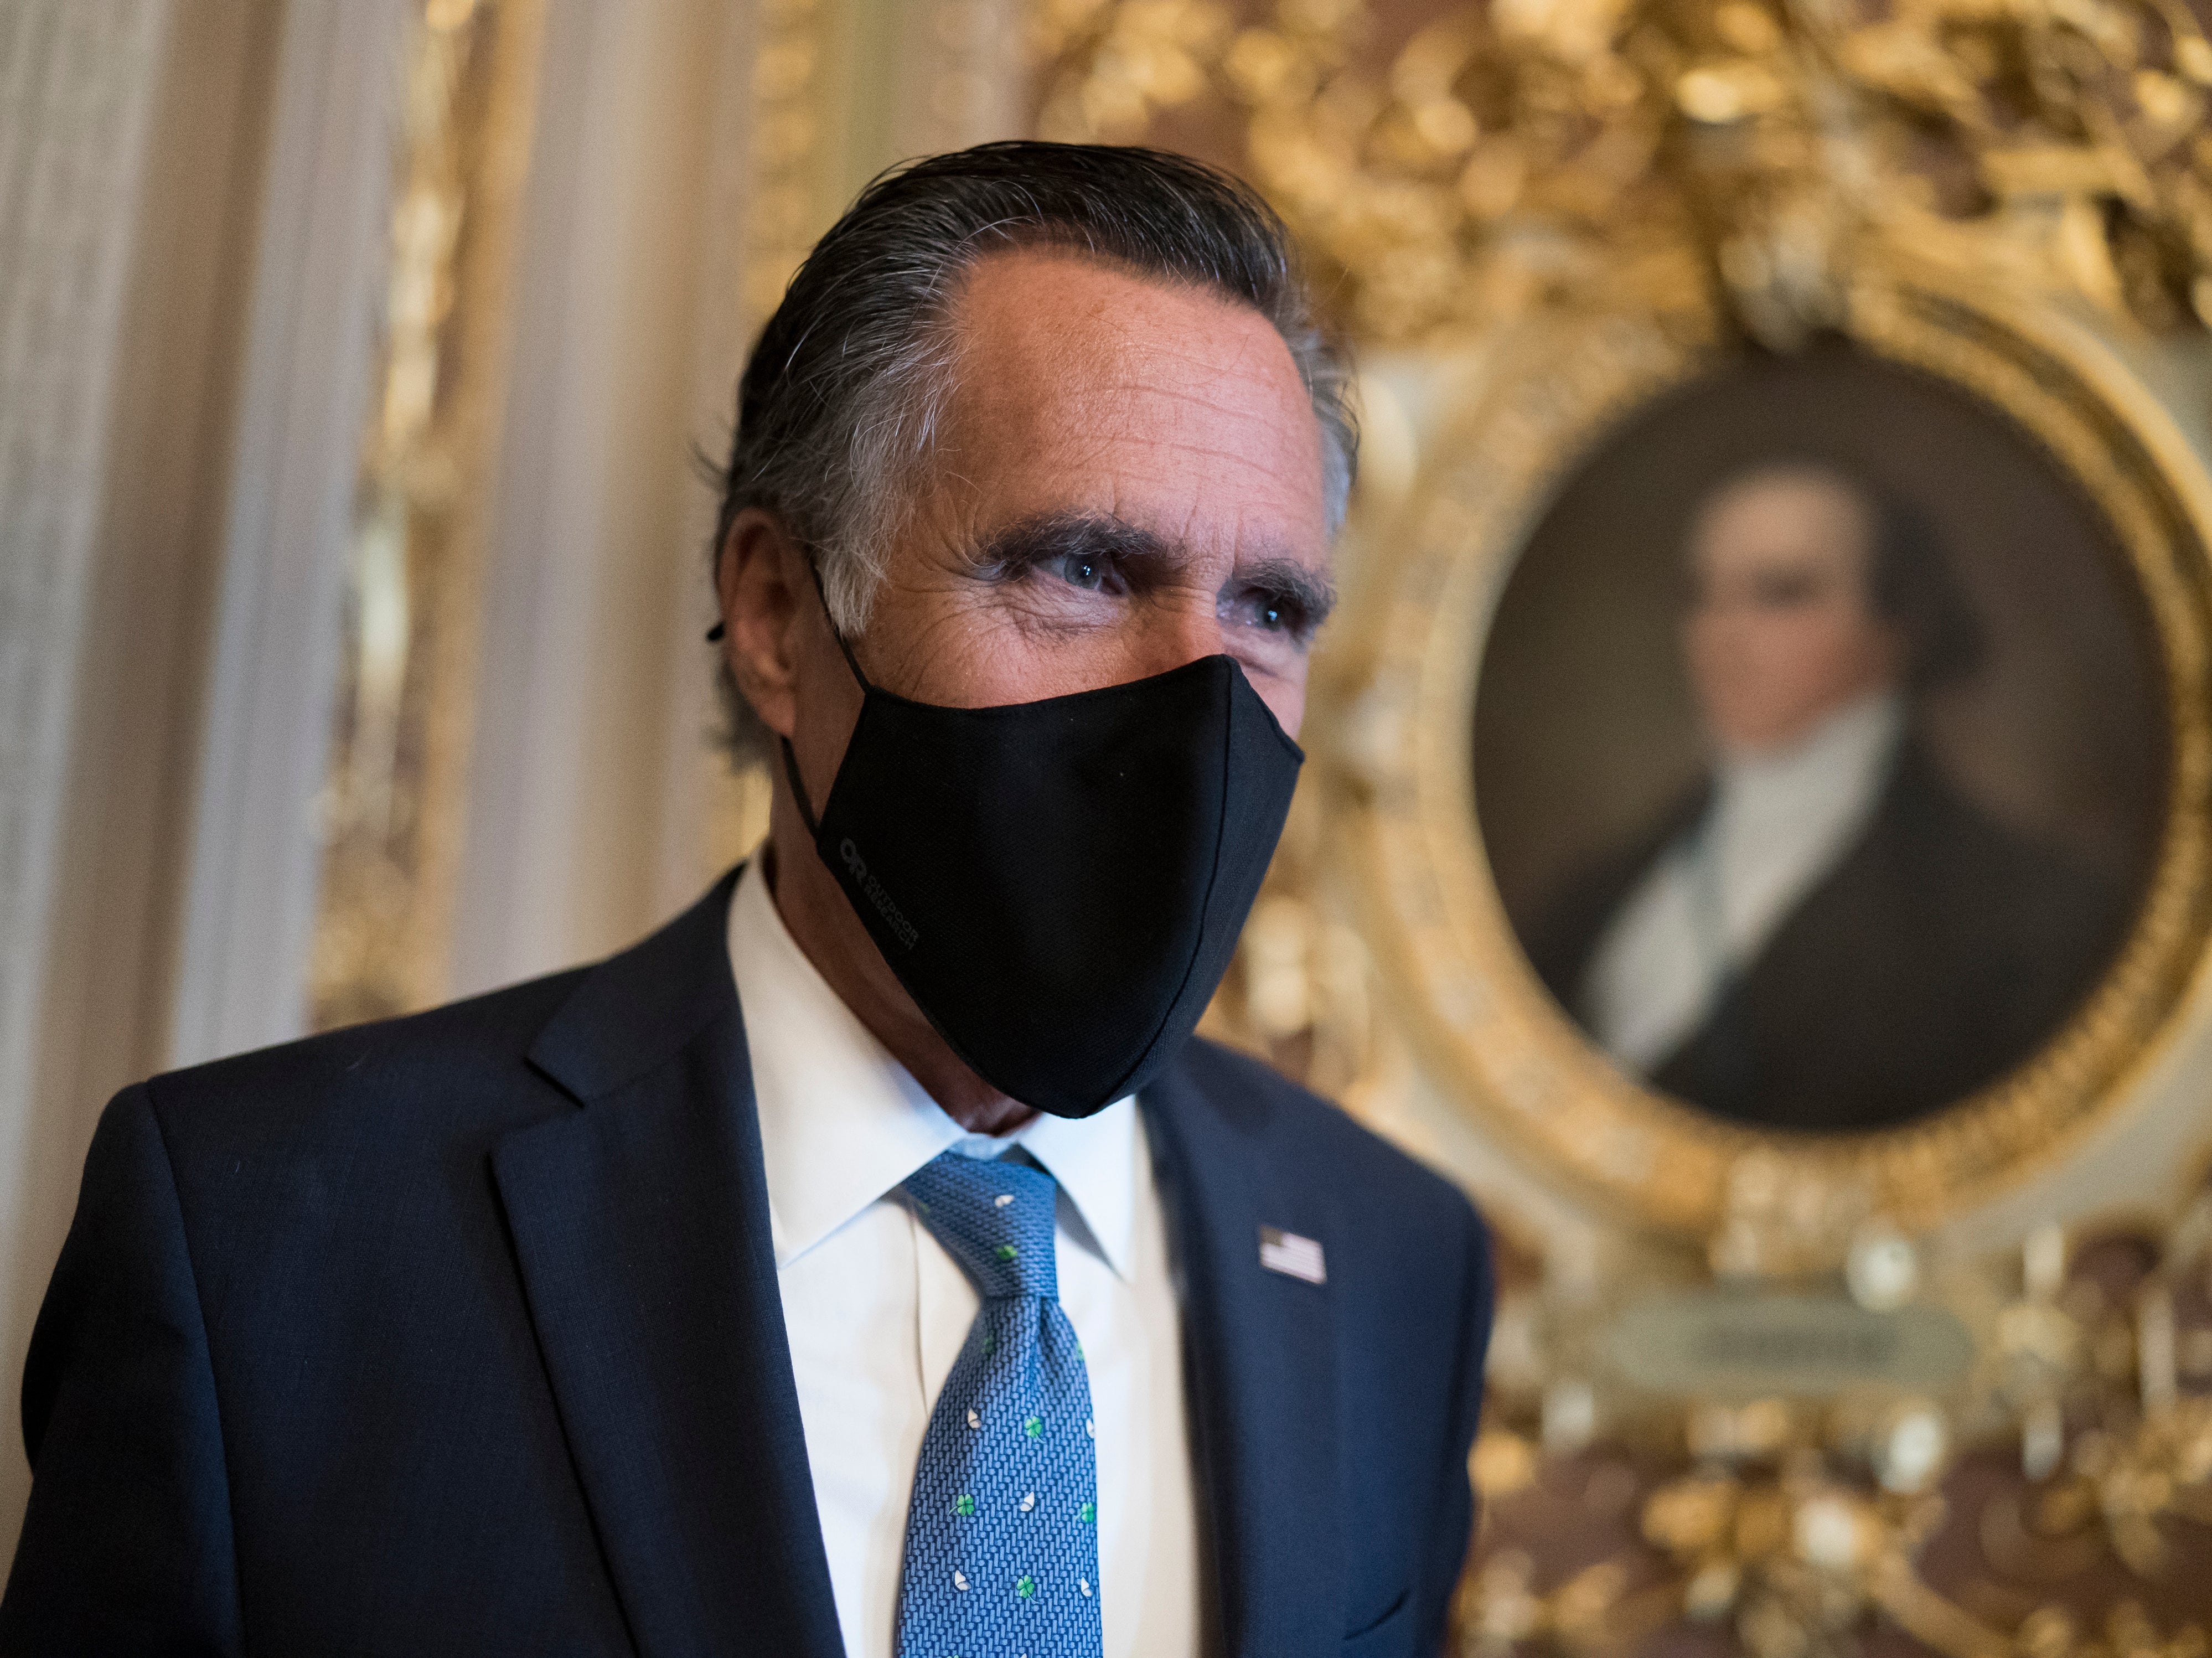 Mitt Romney, R-Utah, pauses to answer questions from reporters as senators arrive to vote on President Joe Biden’s nominee for United Nation’s ambassador, Linda Thomas-Greenfield, at the Capitol in Washington, on Tuesday 23 February 2021